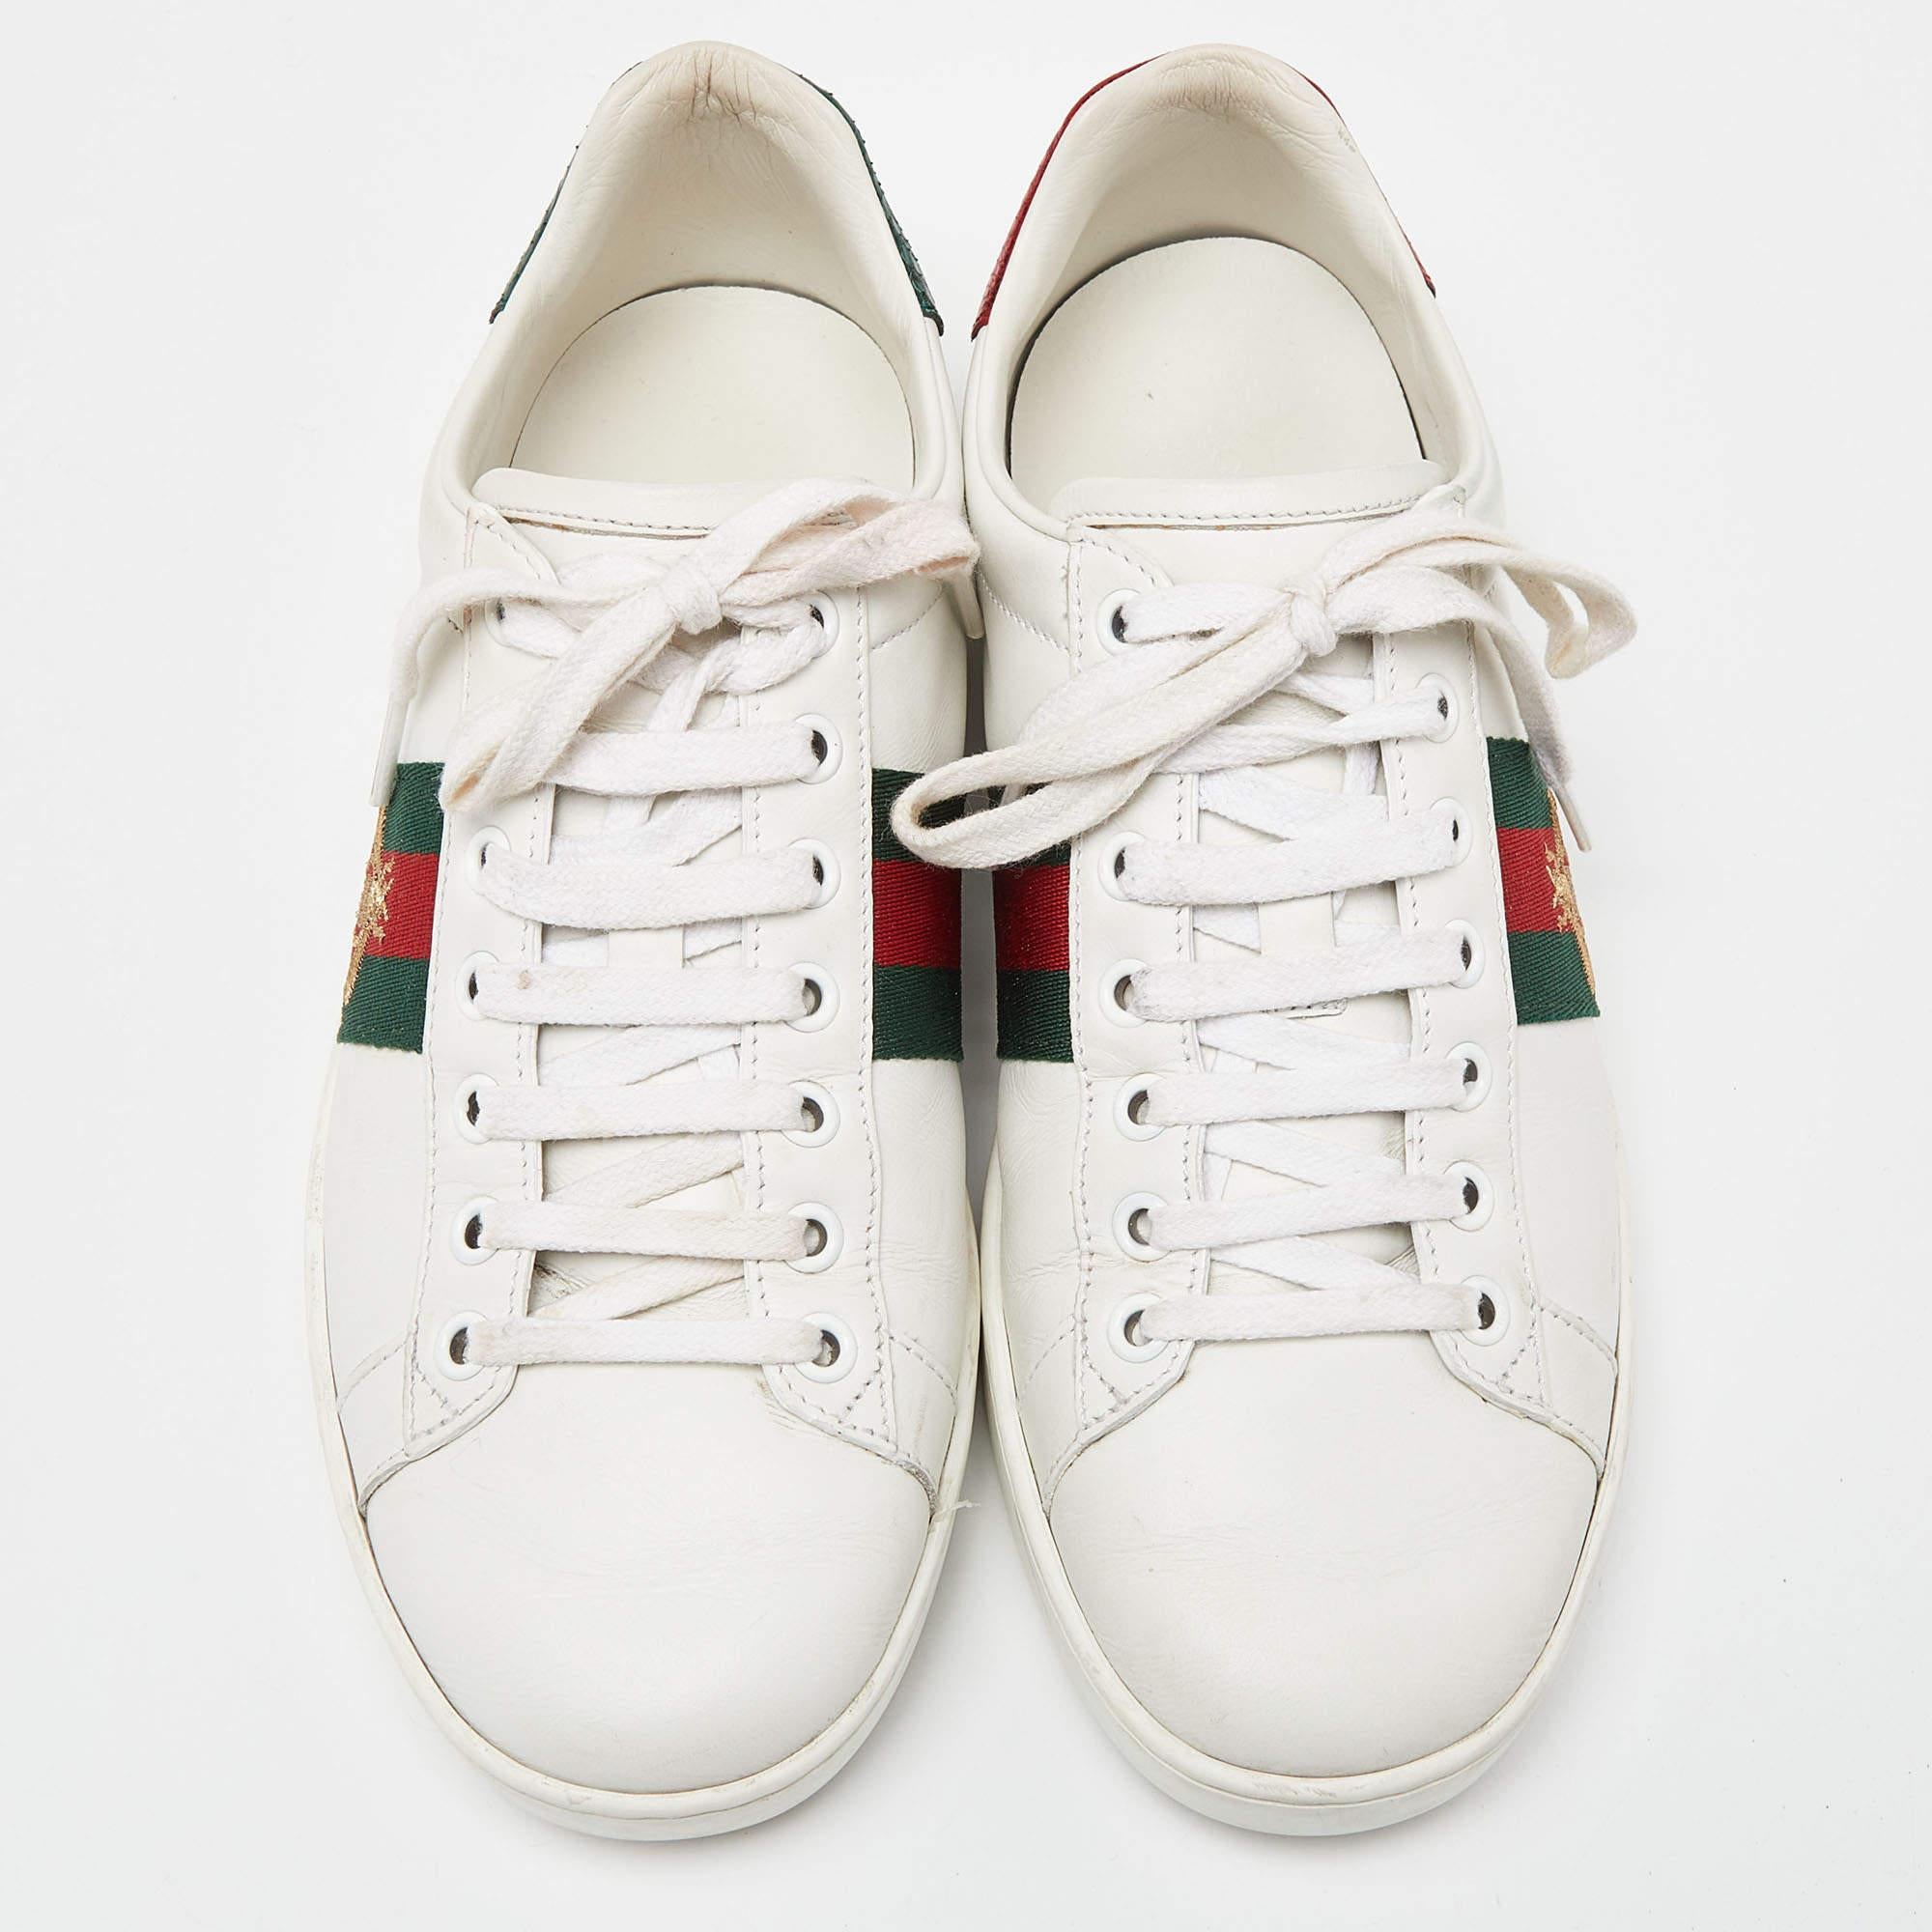 Coming in a classic silhouette, these Gucci white Ace sneakers are a seamless combination of luxury, comfort, and style. These sneakers are designed with signature details and comfortable insoles.

Includes: Original Dustbag, Original Box, Info